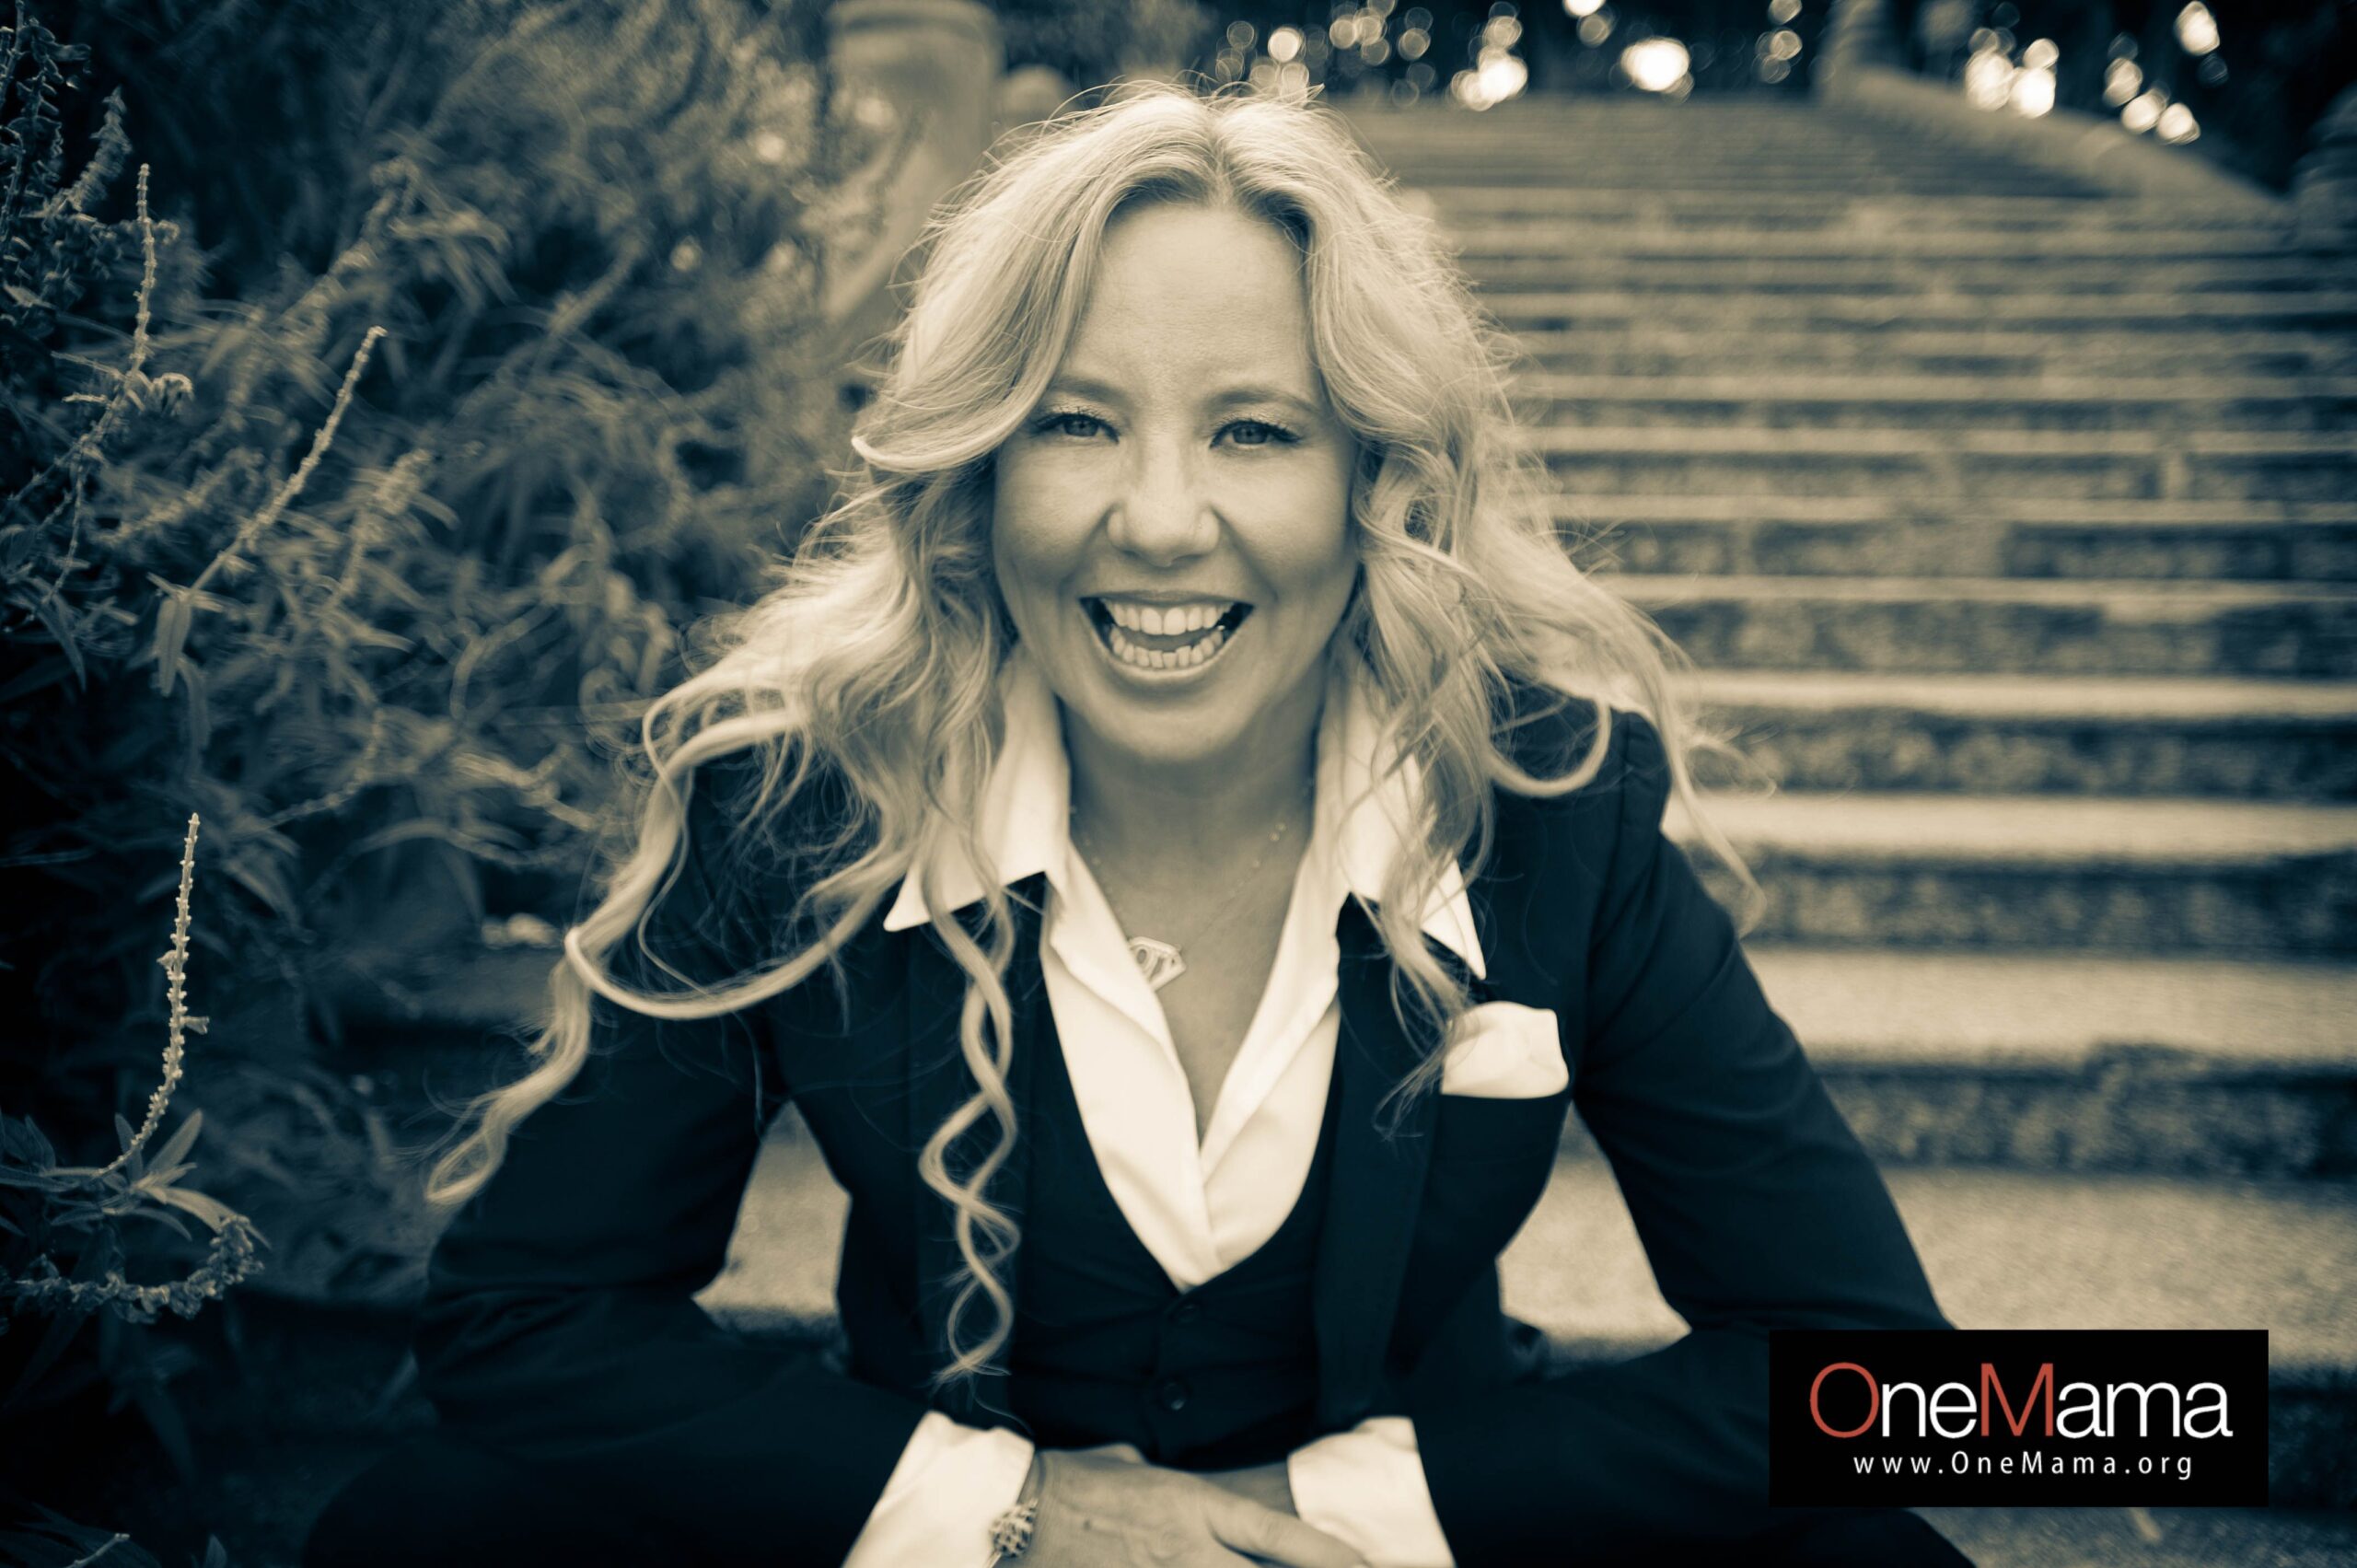 OneMama Siobhan Neilland is a Fortune 500 Recruiter offering Amazon Interview Coaching